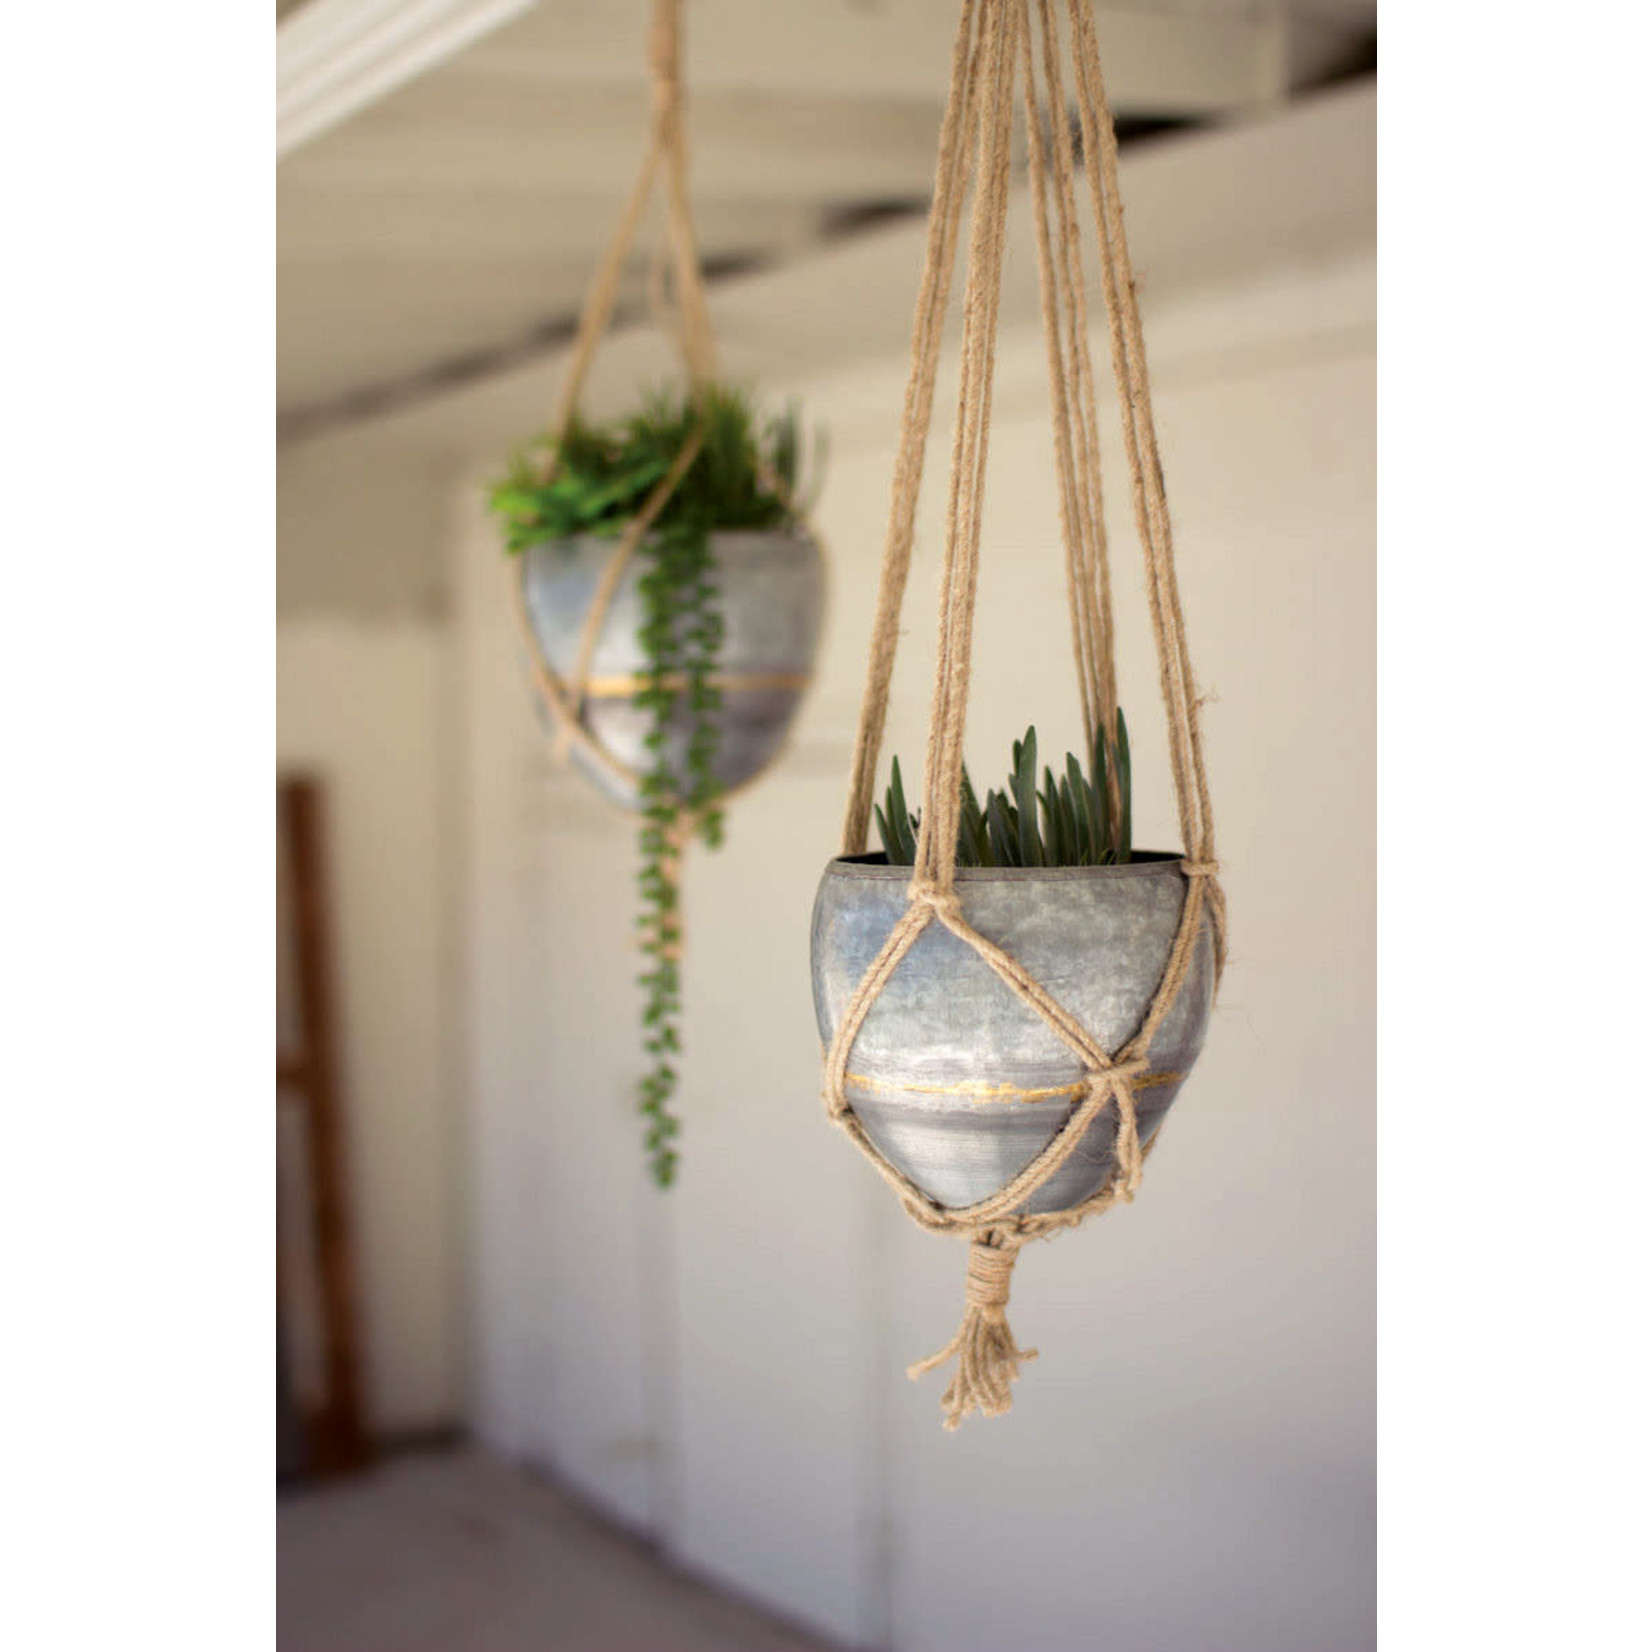 Hanging Galvanized Planter with Woven Jute Rope